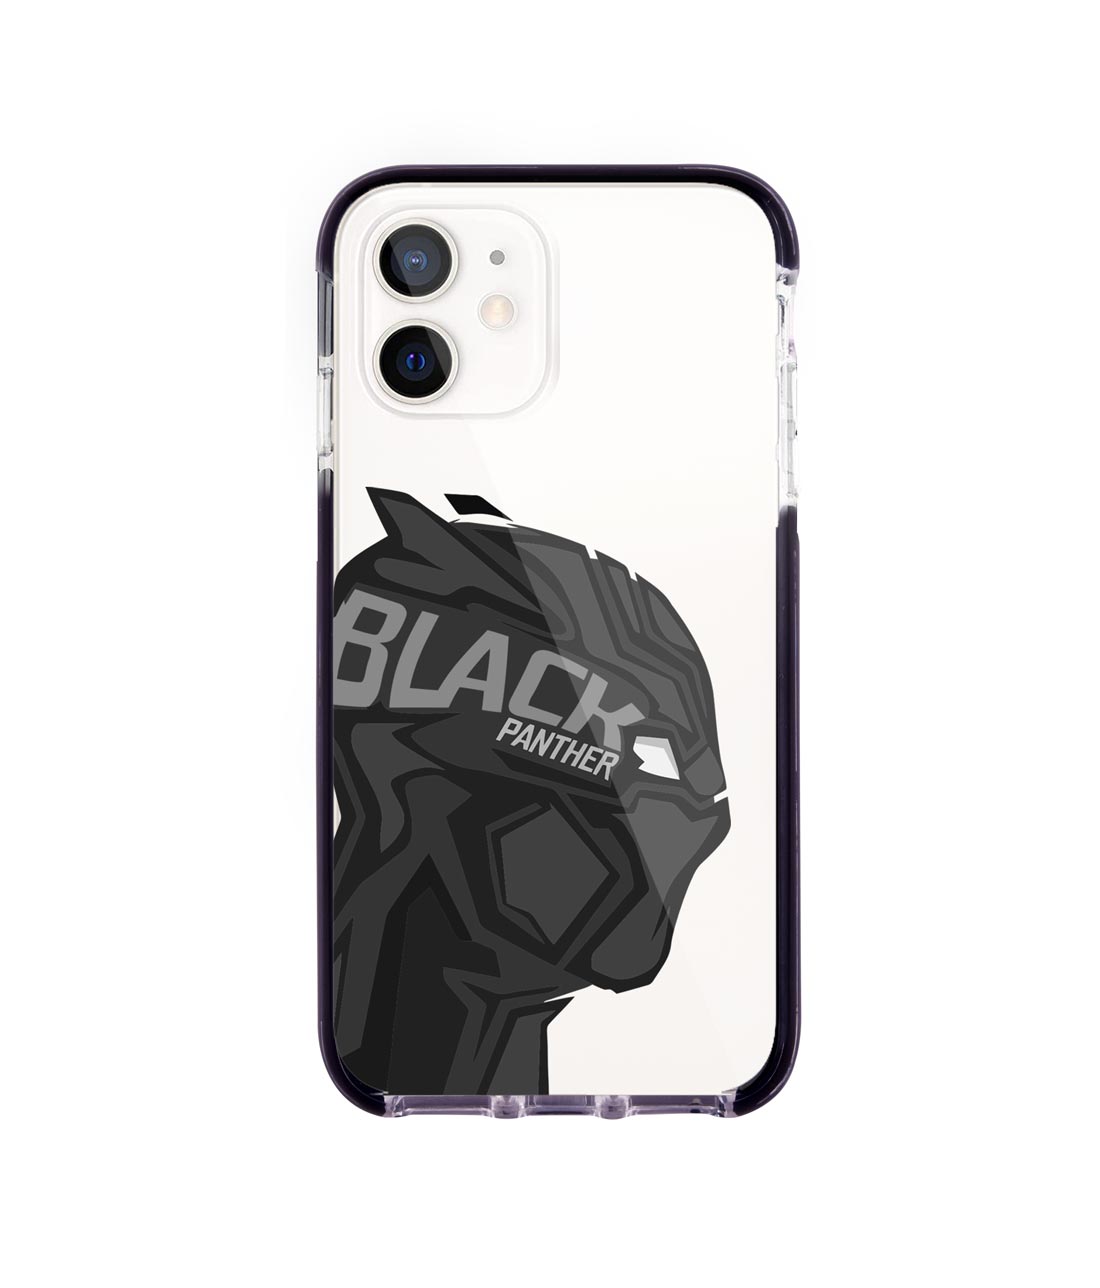 Black Panther Art - Extreme Case for iPhone 12 Mini